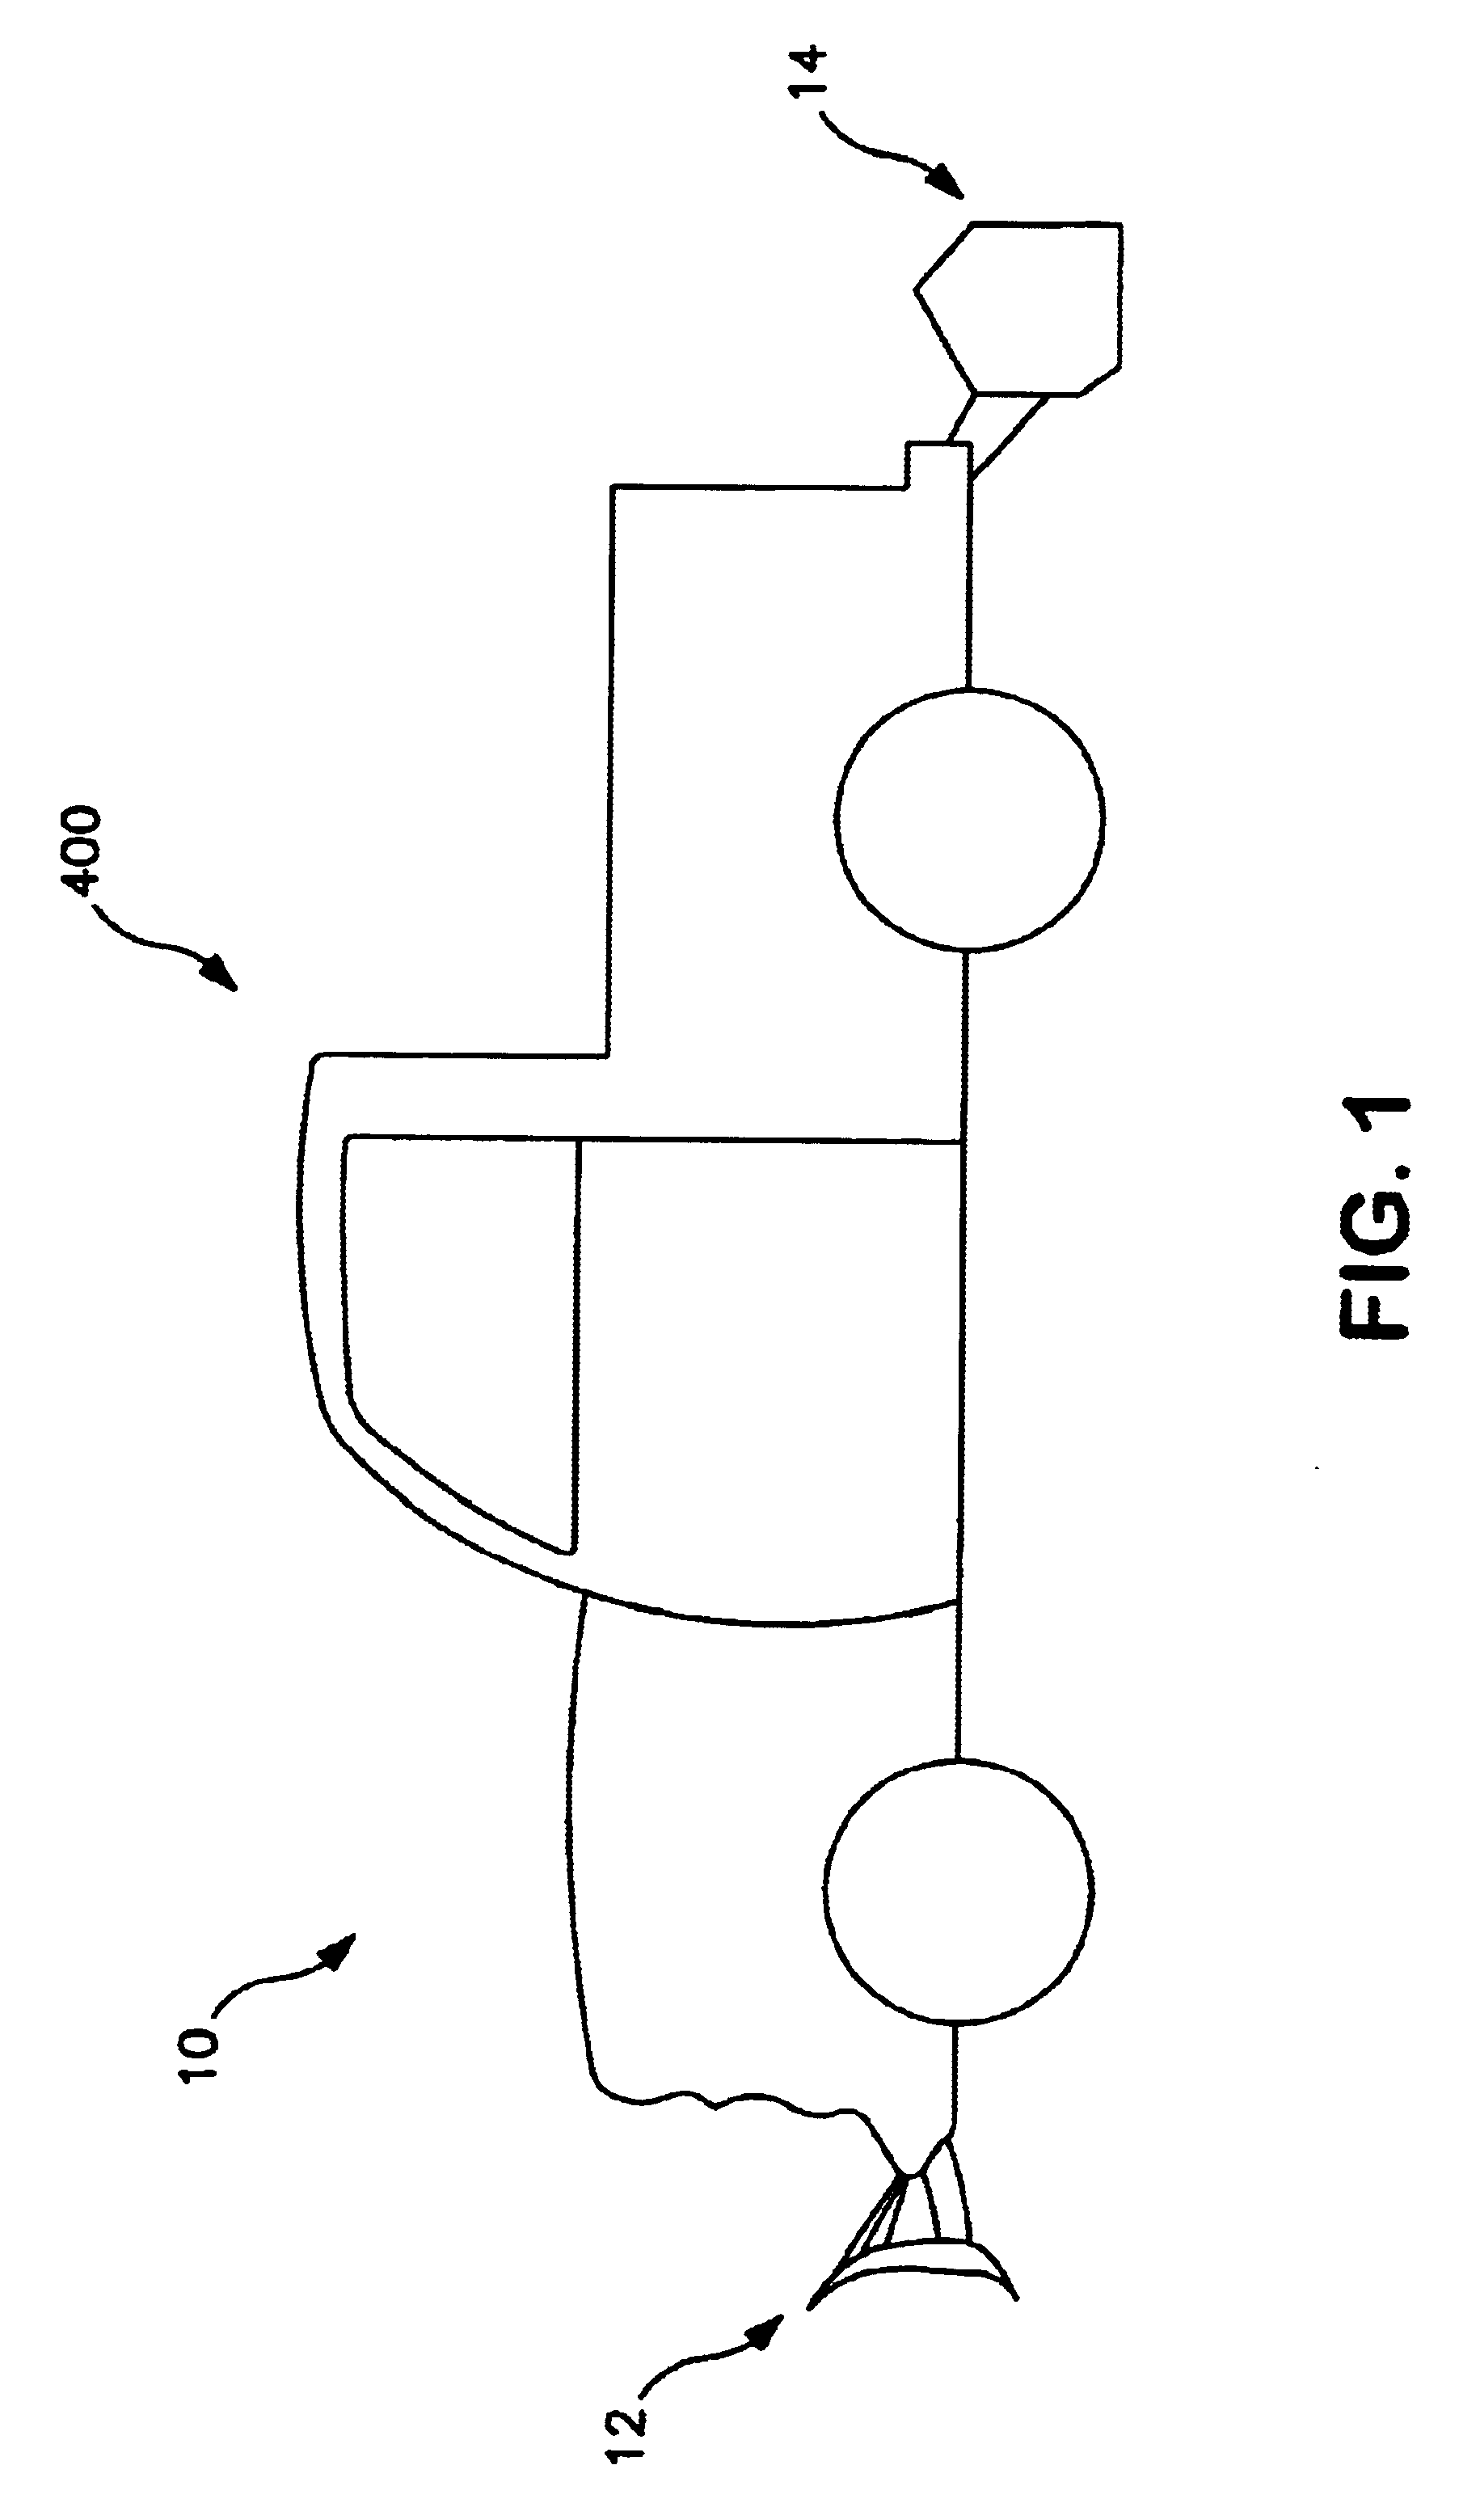 Plow system for a vehicle